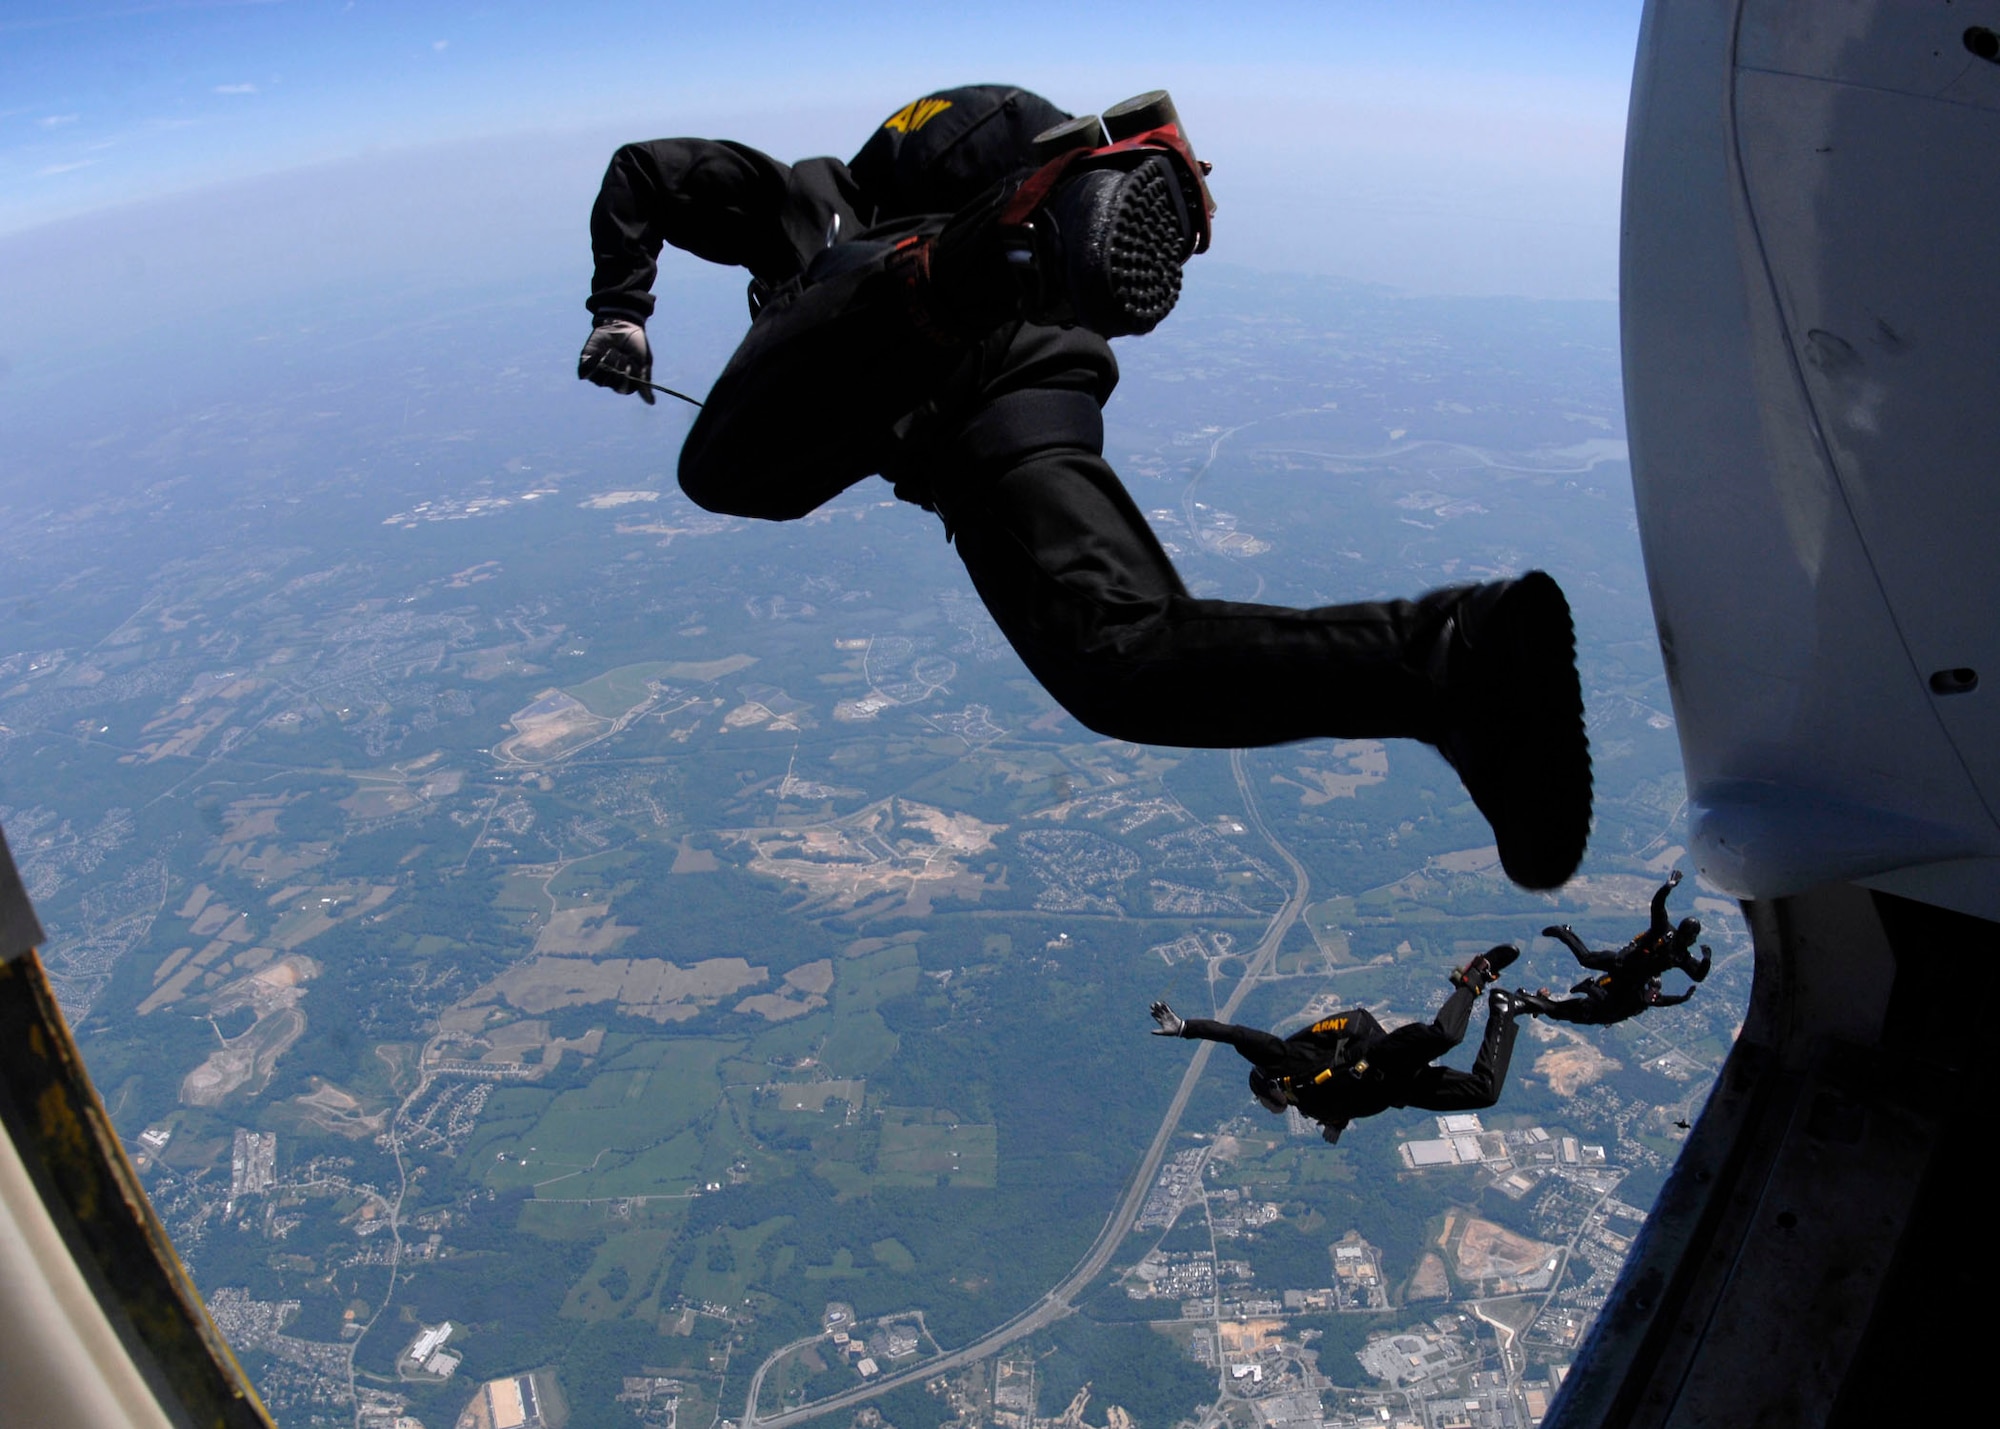 Members of the U.S. Army parachute team, ?Golden Knights?, jump over the annual Joint Service Open House held at Andrews Air Force Base May 17.  The 2008 JSOH commemorated the 60th Anniversary of the Berlin Airlift and showcased the Navy Blue Angels, the Army's Golden Knights and a wide variety of both military and civilian air and ground demonstrations. (U.S. Air Force photo/Senior Airman Steven R. Doty)